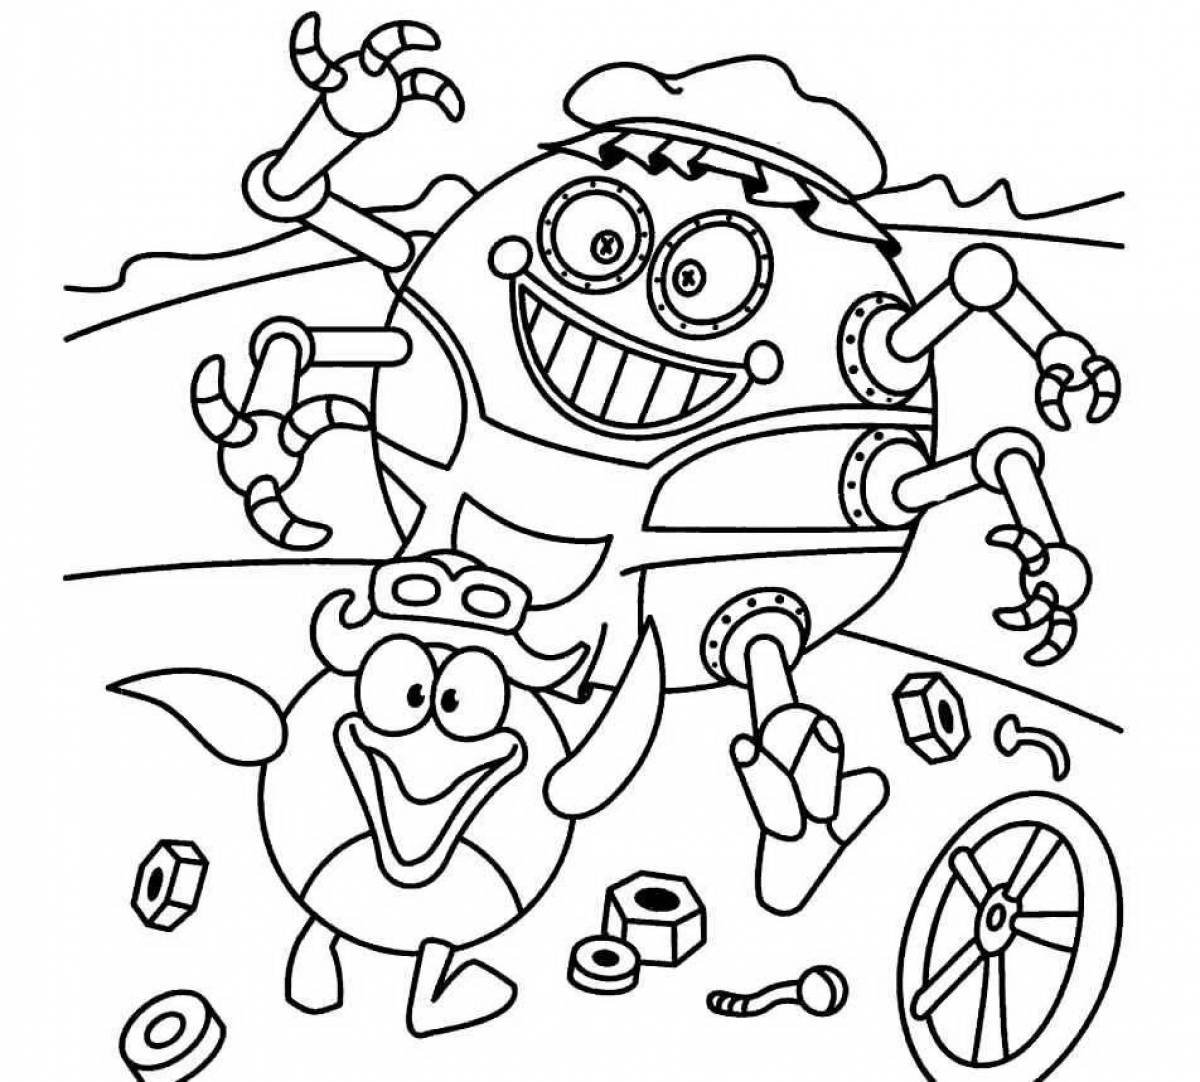 Detailed coloring page